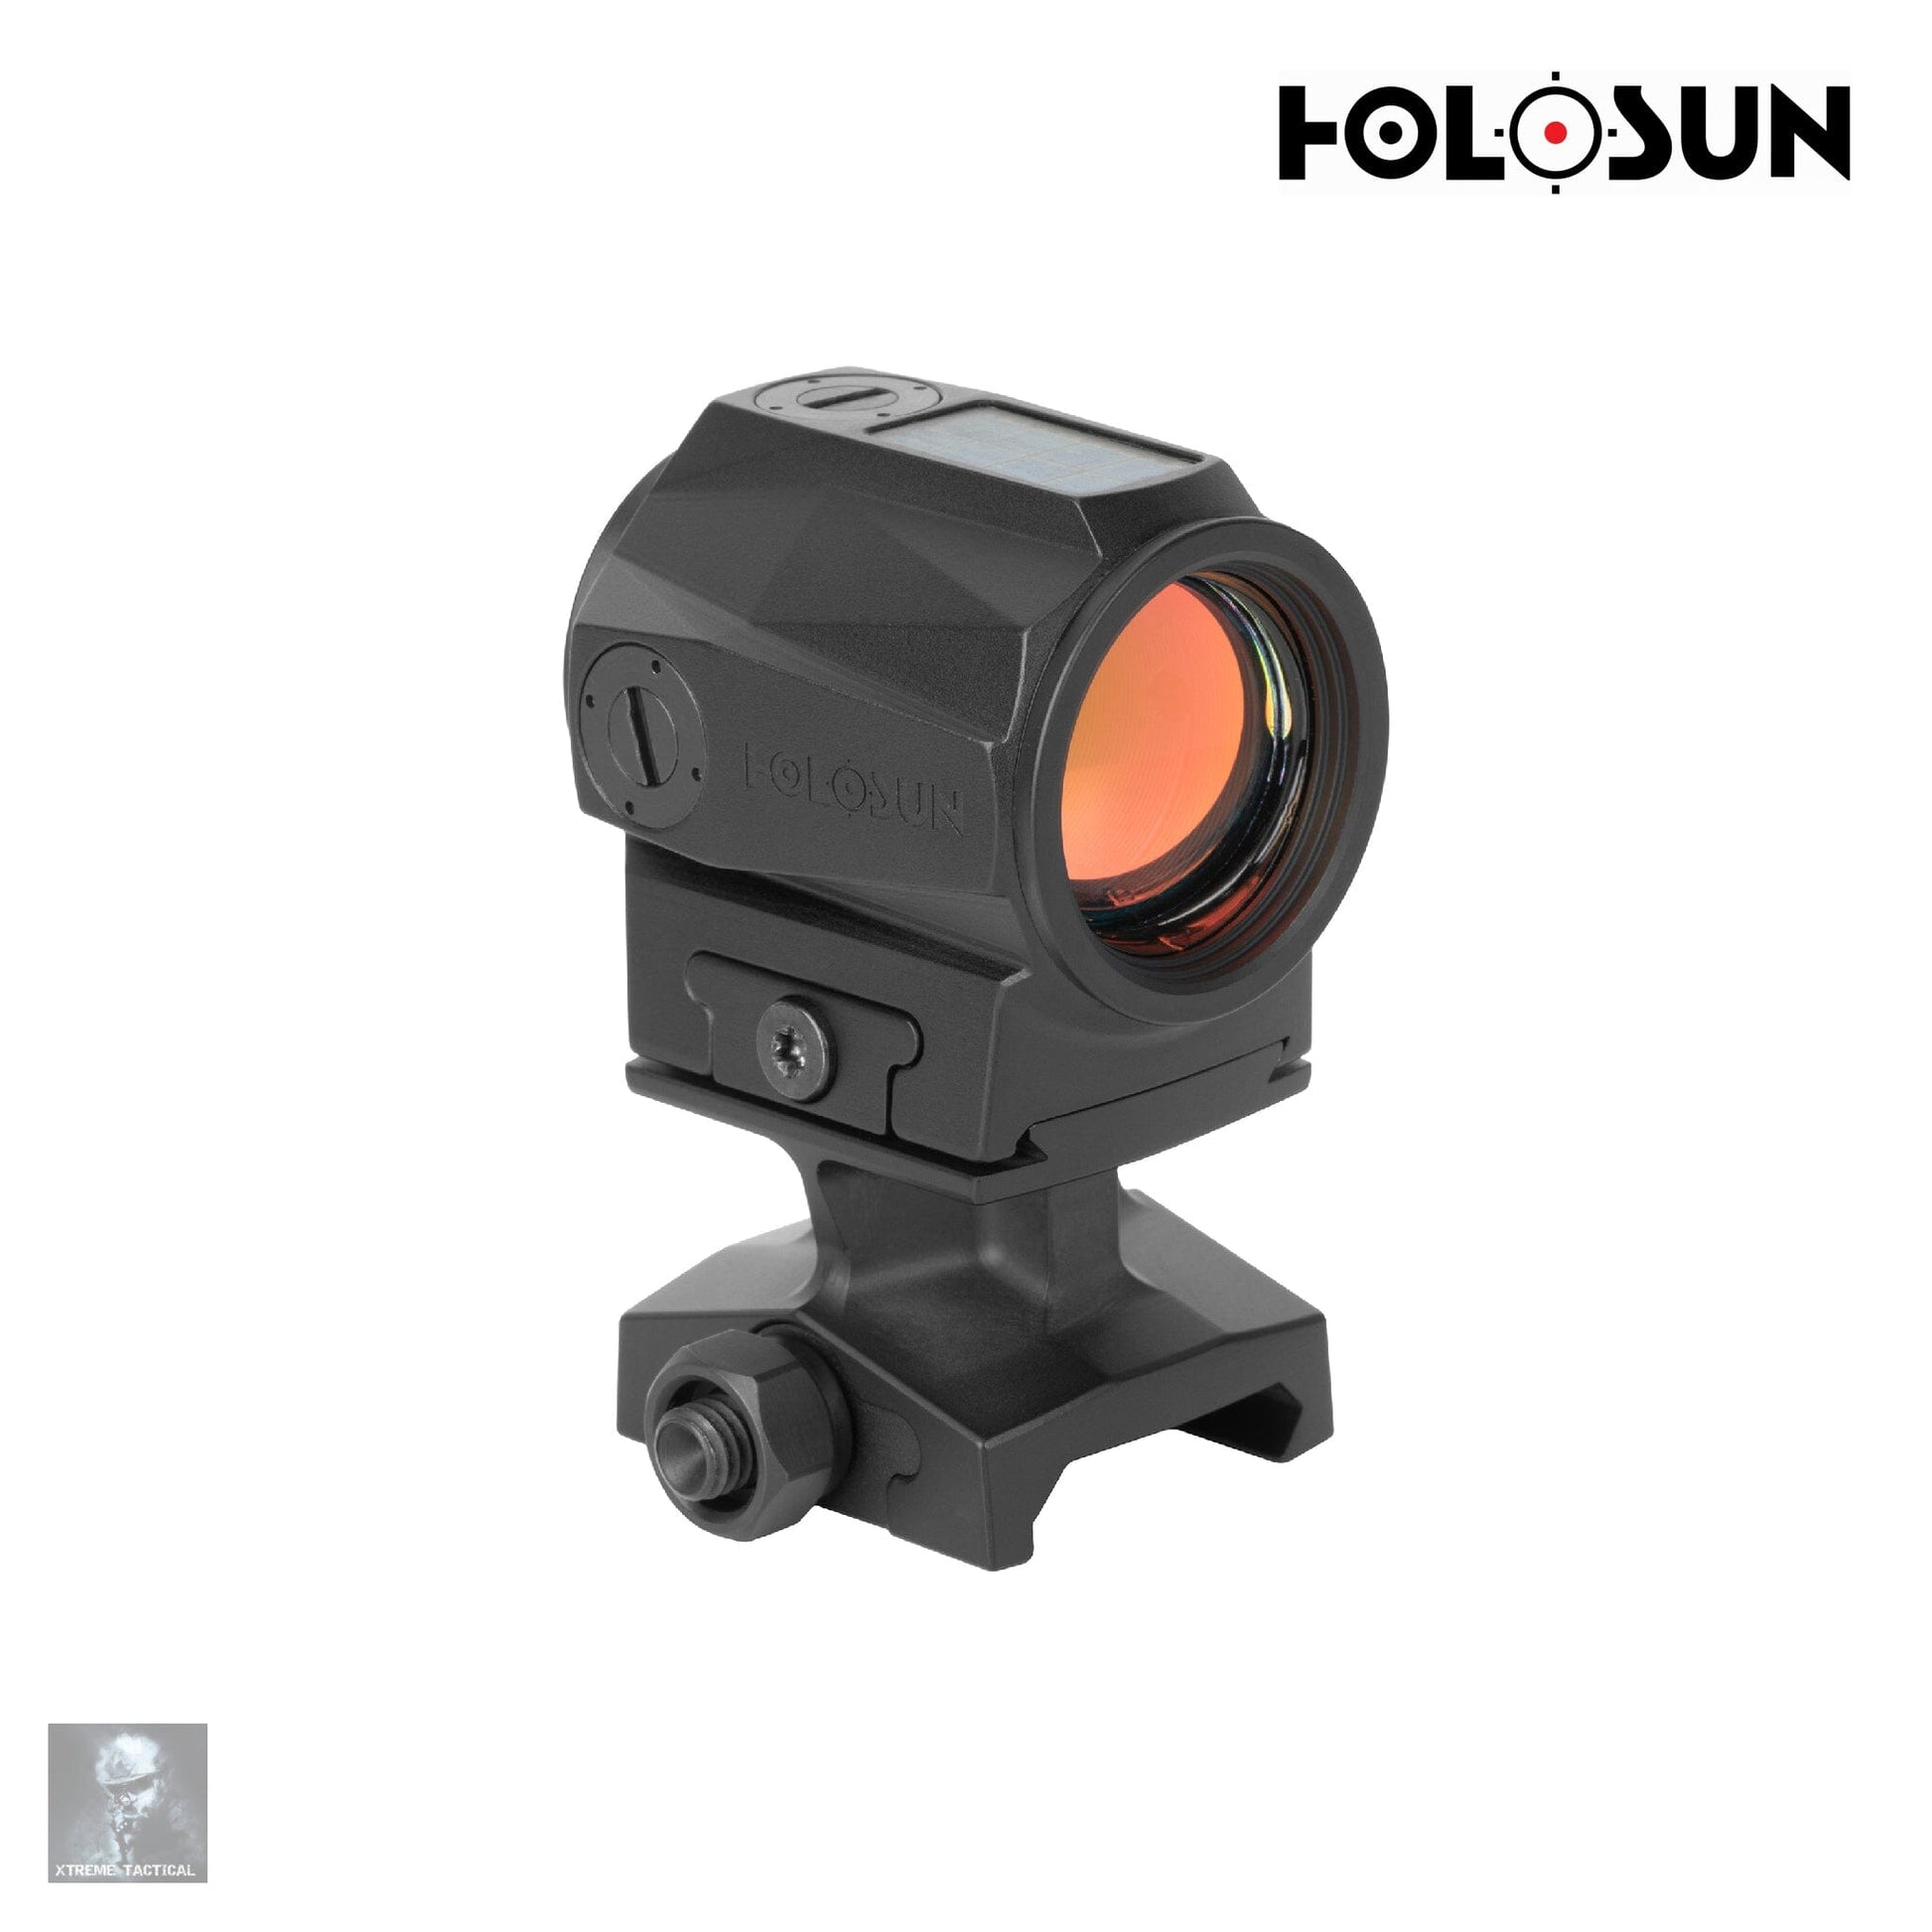 Holosun SCRS Red Dot Sight Multi Reticle - SCRS-RD-MRS Red Dot Sight Holosun Technologies 